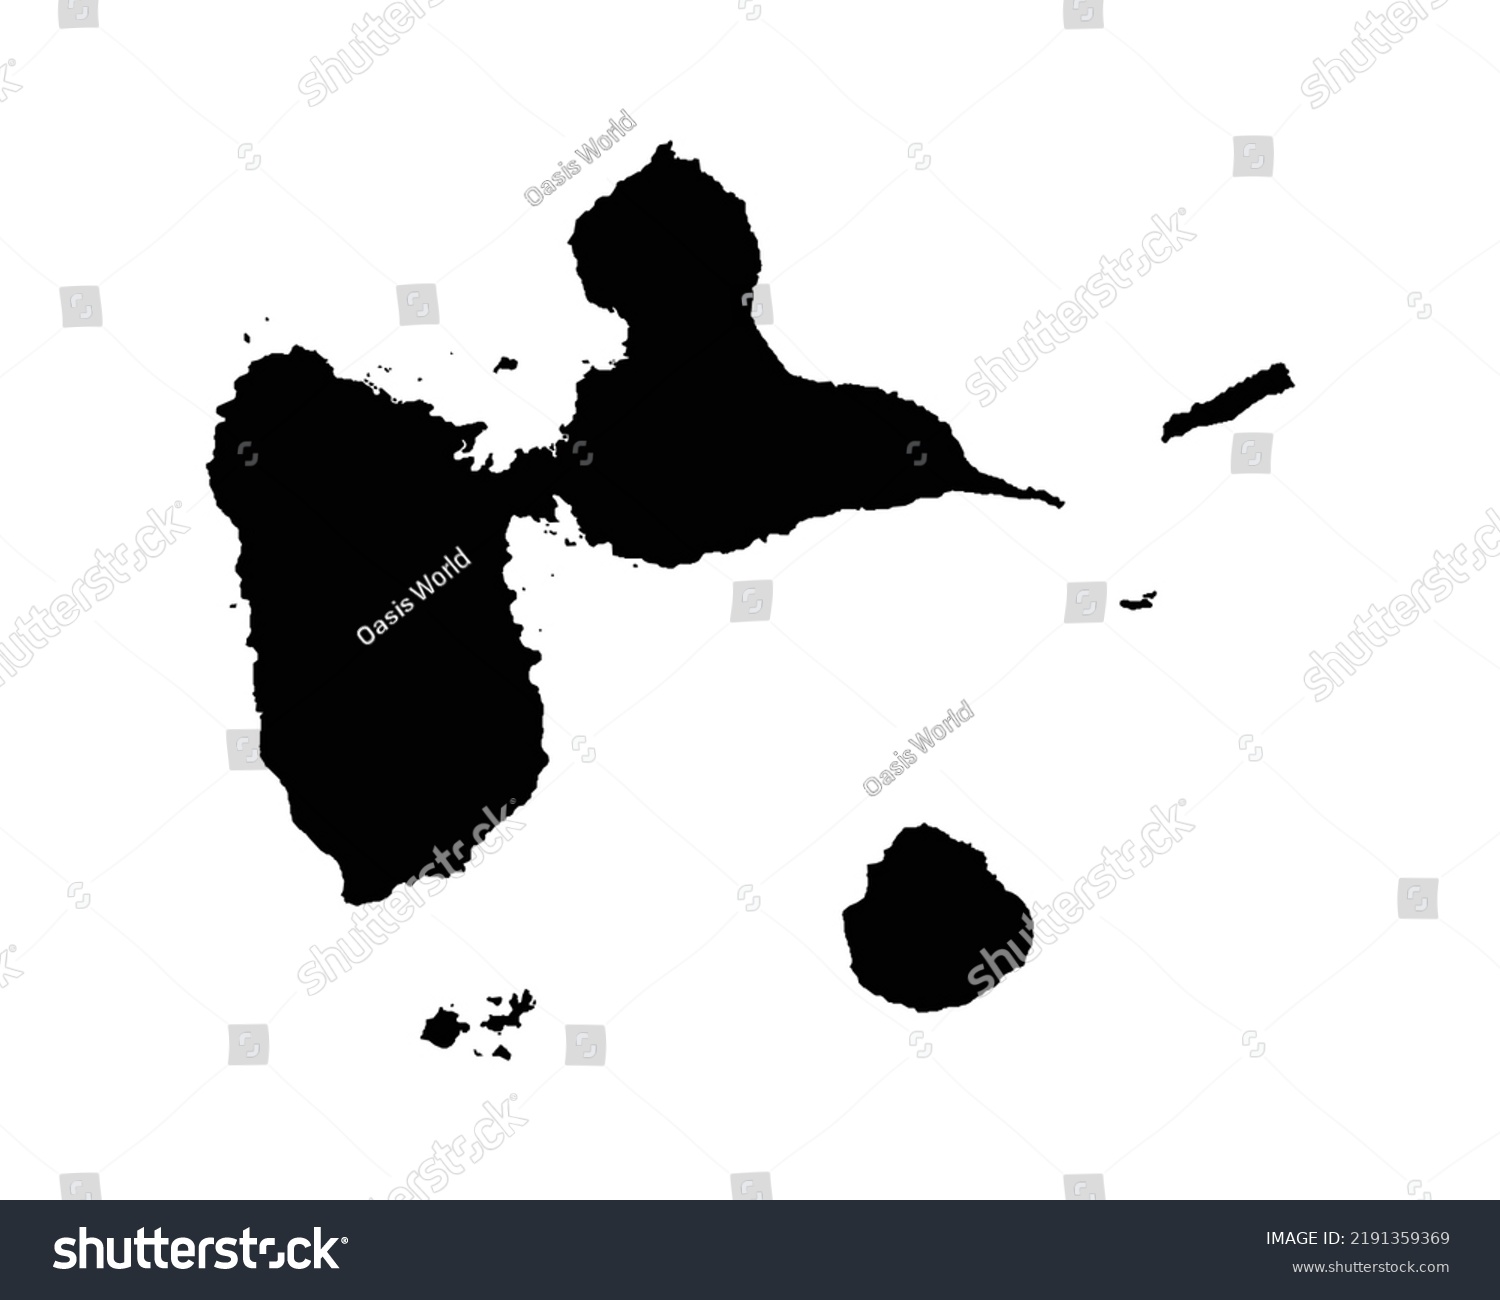 SVG of Guadeloupe Map. Guadeloupean Map. Black and White French Overseas Department Territory Border Boundary Line Outline Geography Shape Vector Illustration EPS Clipart svg